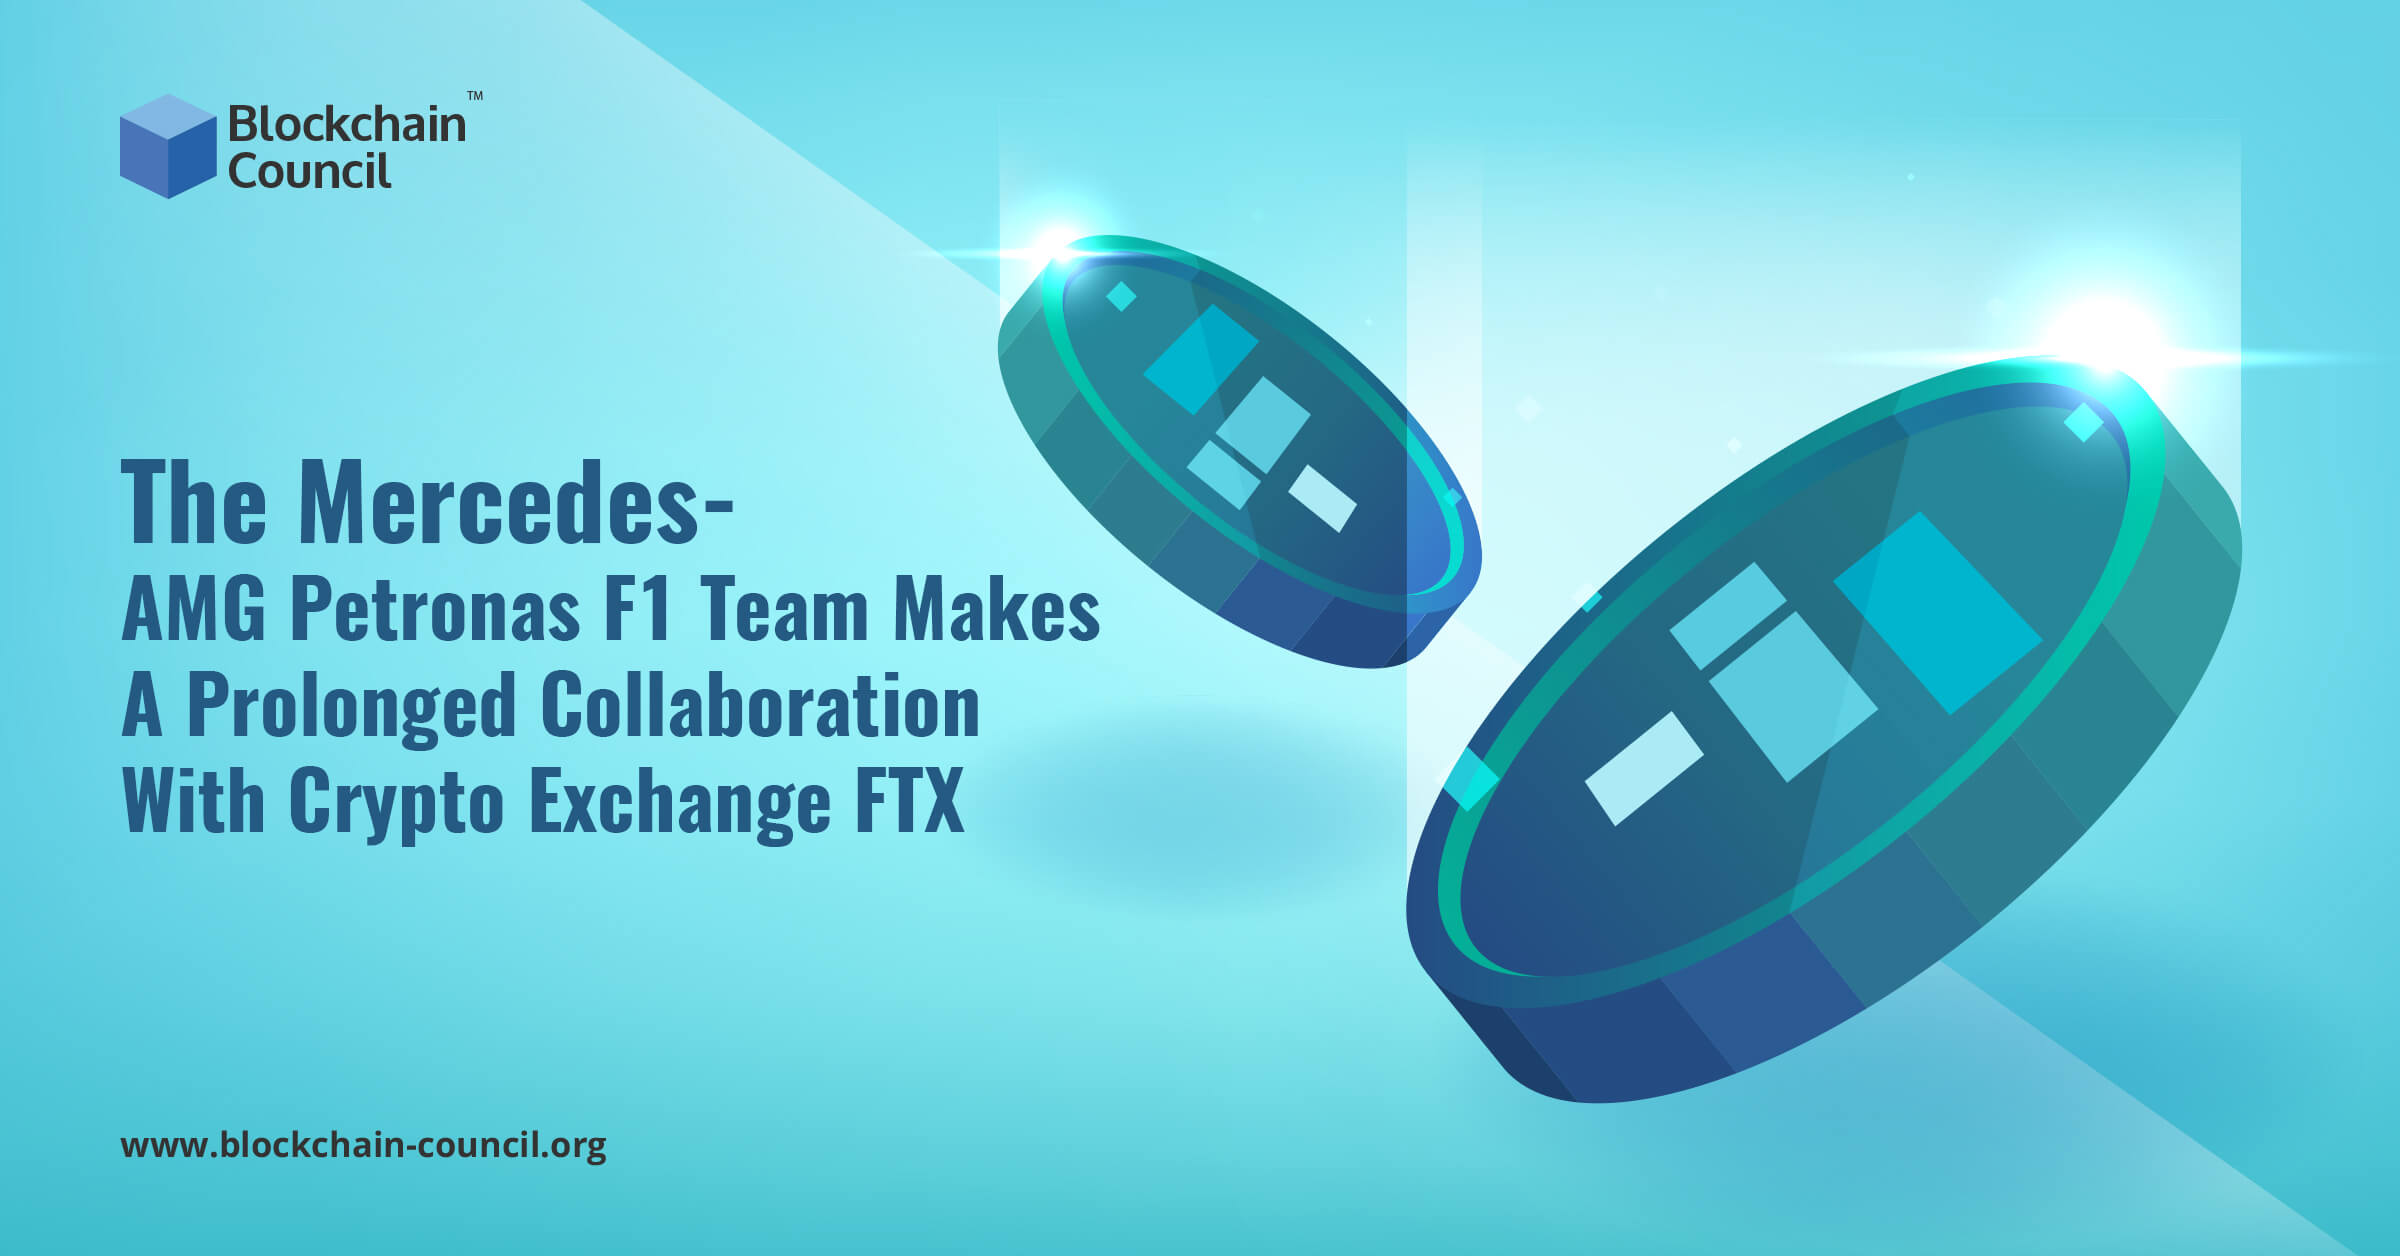 The Mercedes-AMG Petronas F1 Team Makes A Prolonged Collaboration With Crypto Exchange FTX